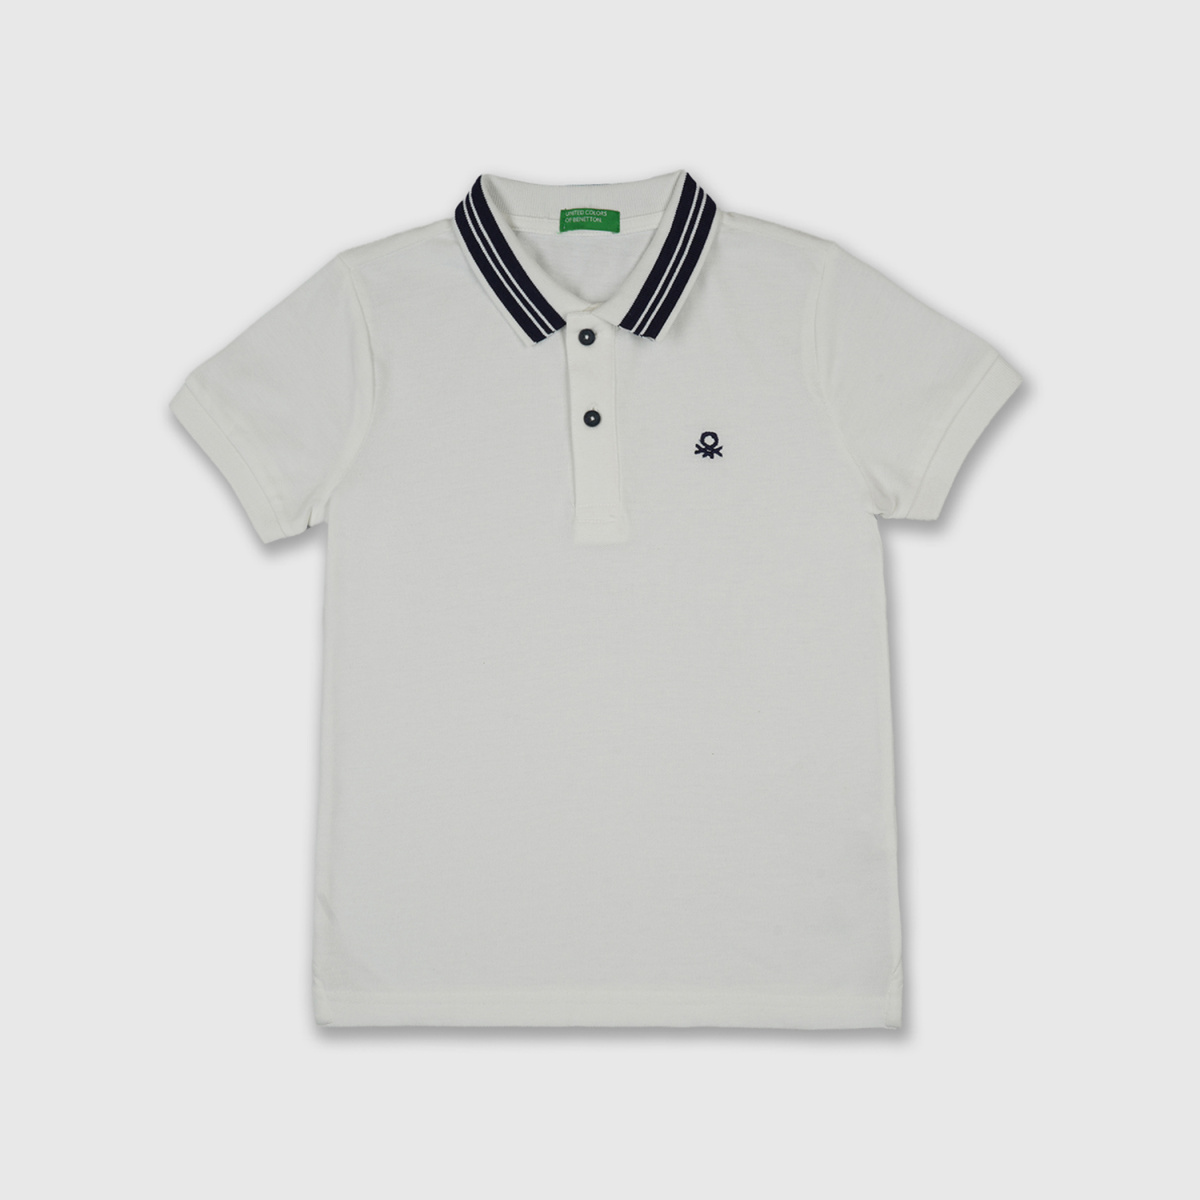 UNITED COLORS OF BENETTON Boys Solid Polo T-shirt